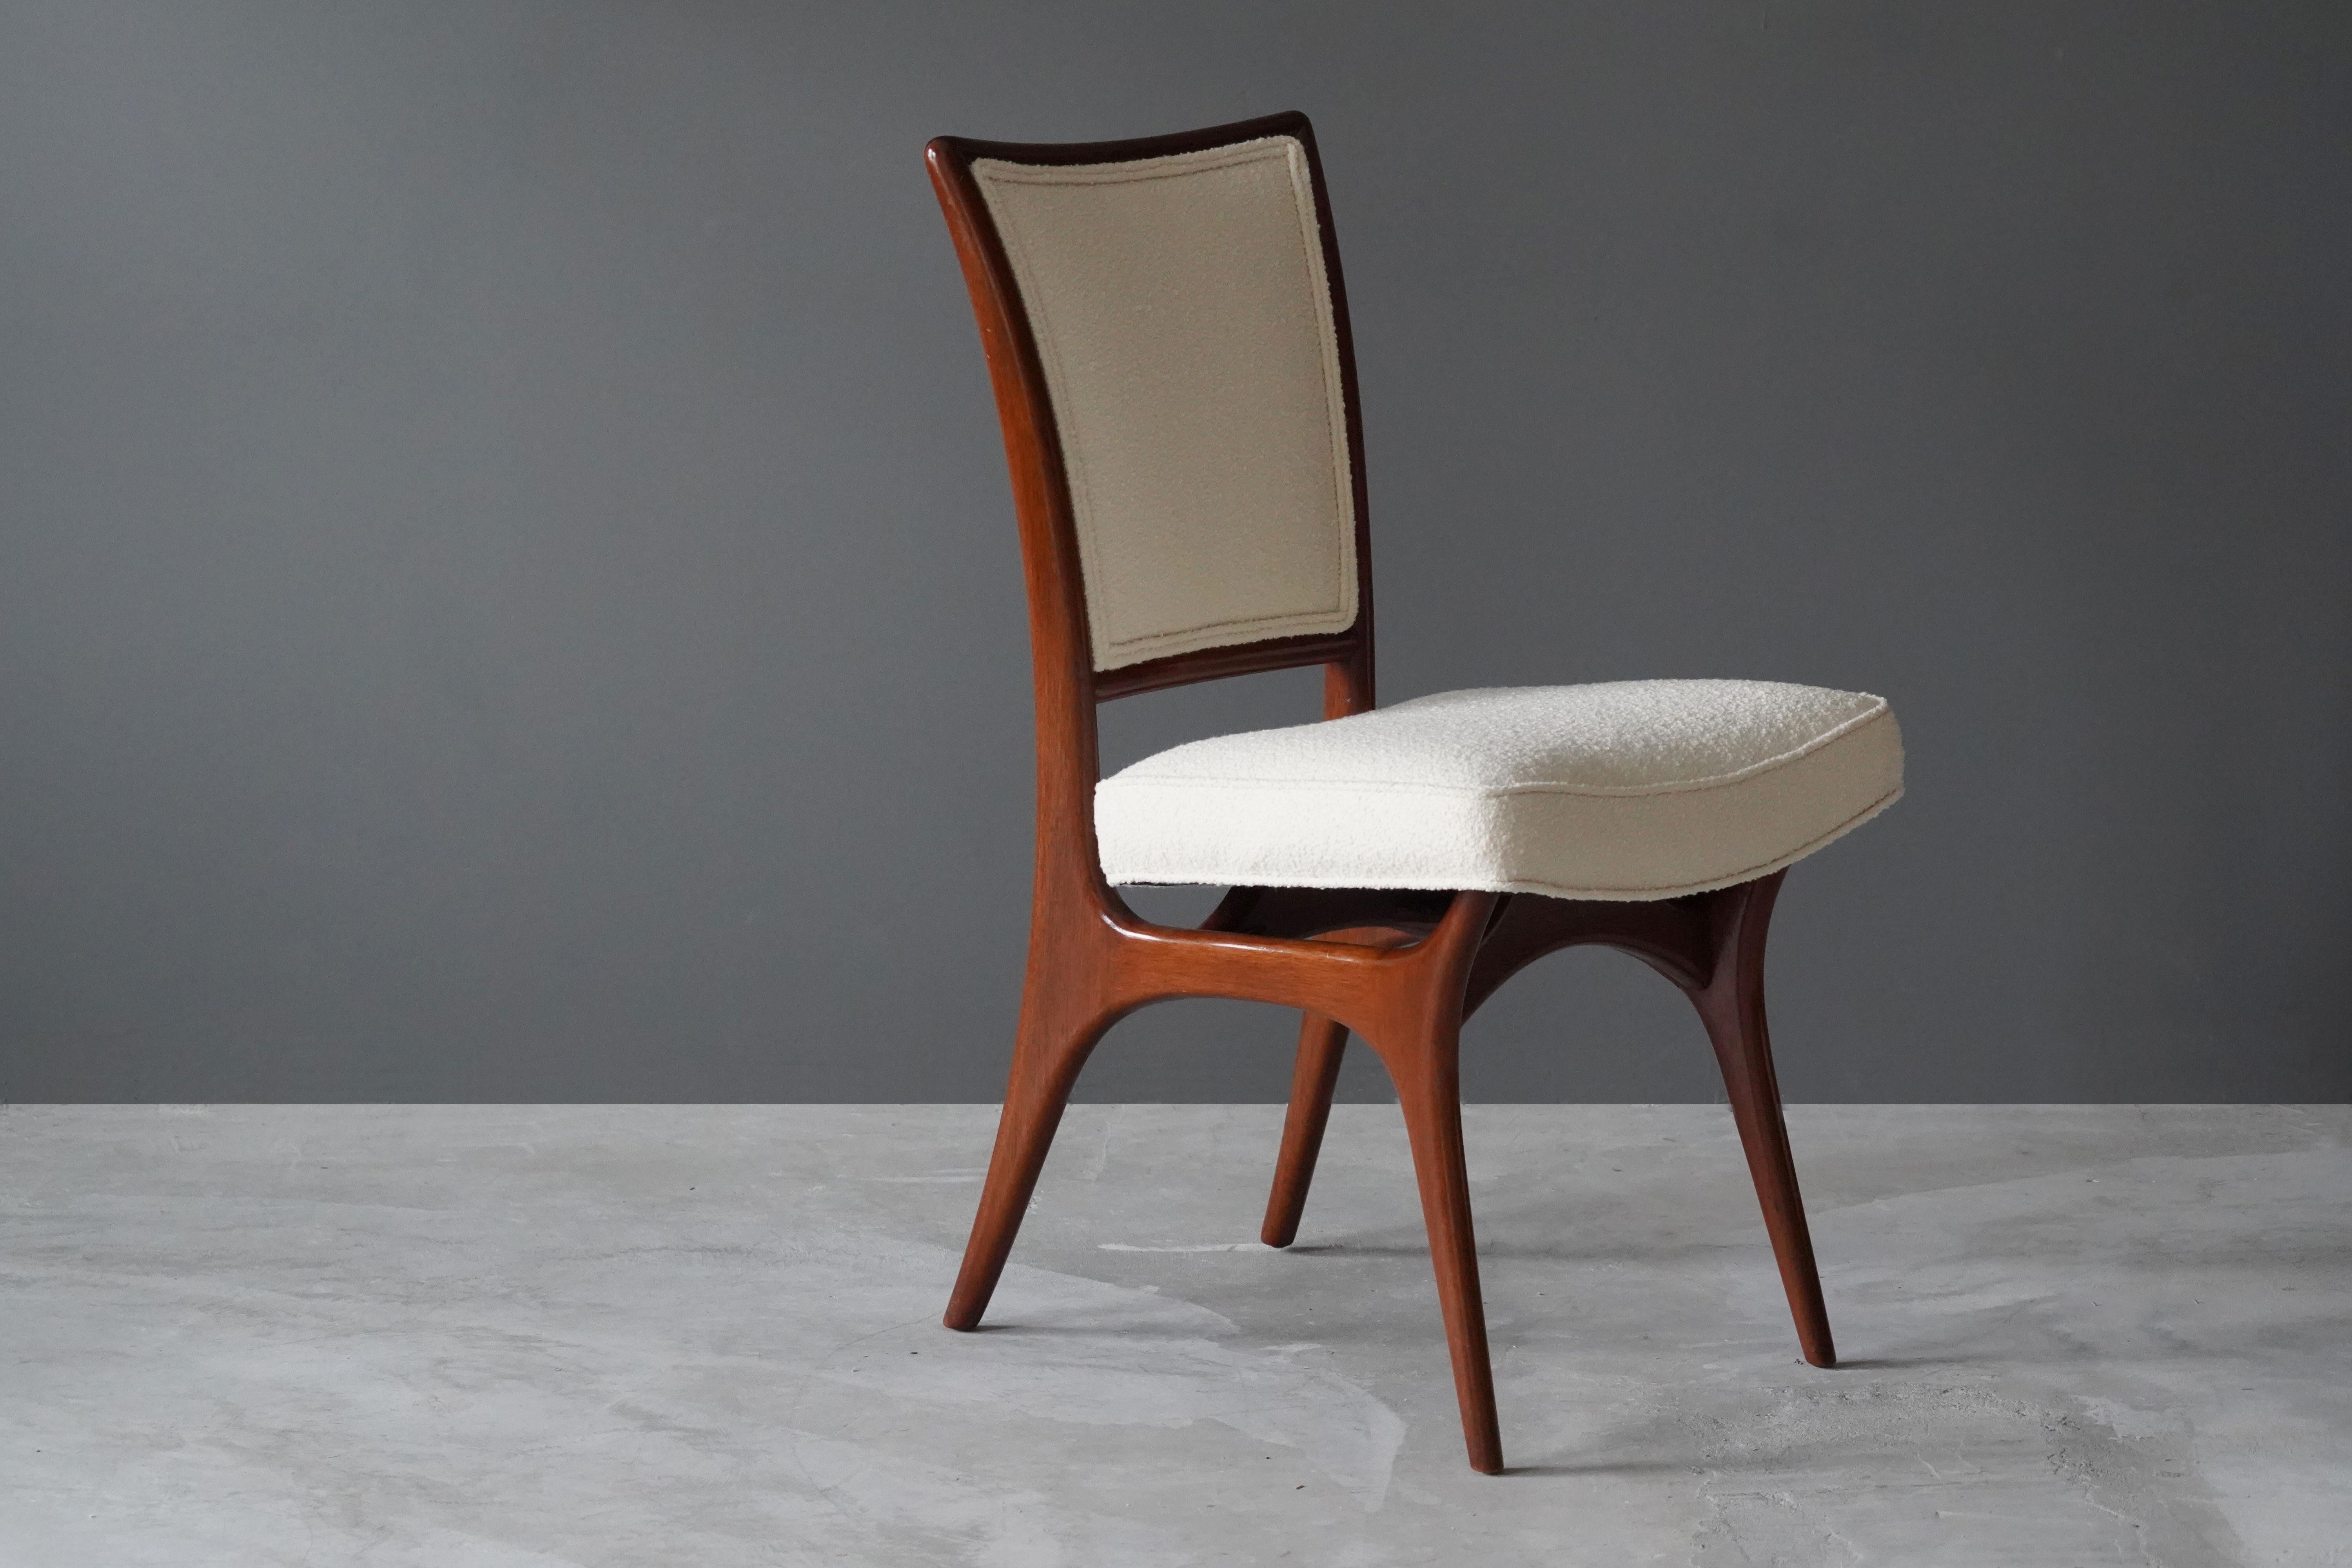 A sculptural organic side chair or dining chair designed by Vladimir Kagan. Organicly carved walnut is paired with a high-end boucle fabric. Marked.